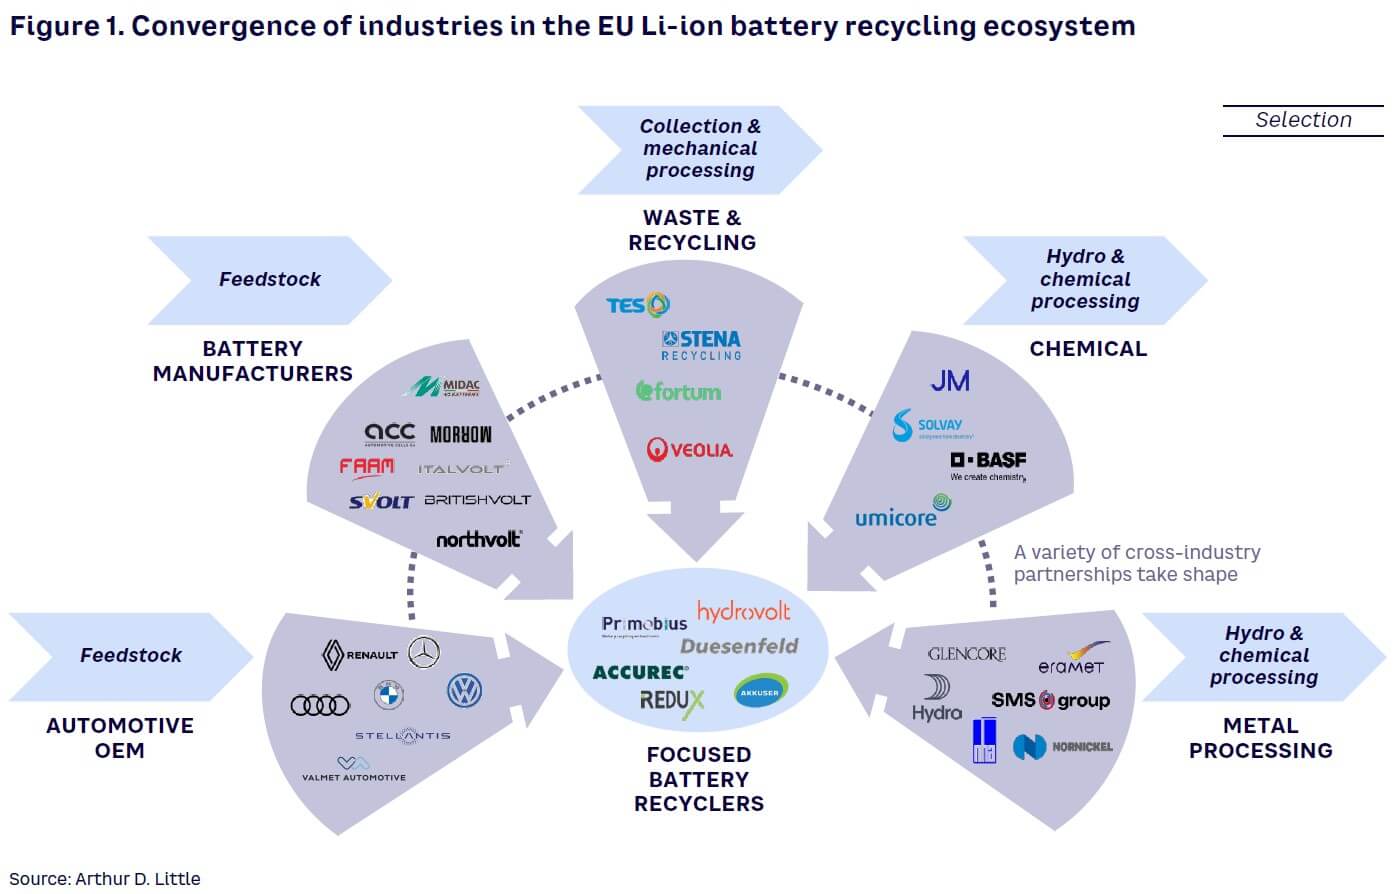 Figure 1. Convergence of industries in the EU Li-ion battery recycling ecosystem